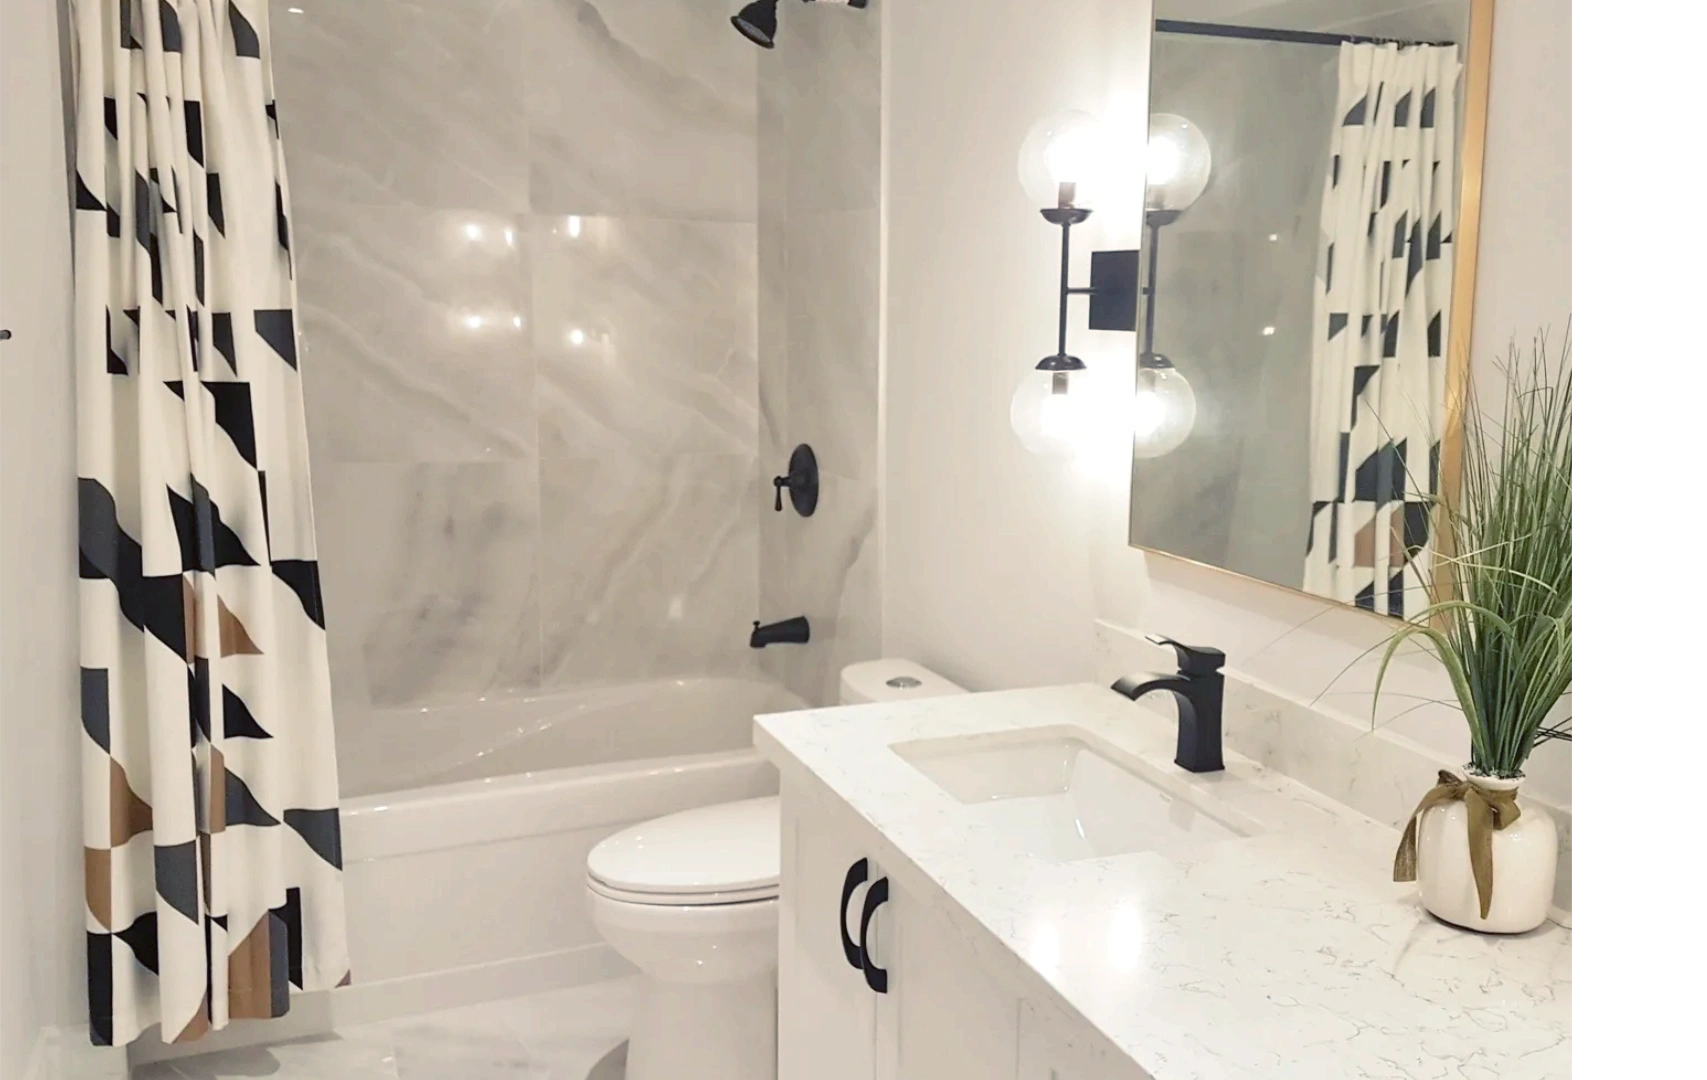 black and white bathroom with onyx style porcelain tiles. wall mounted sconces, double sink vanity.